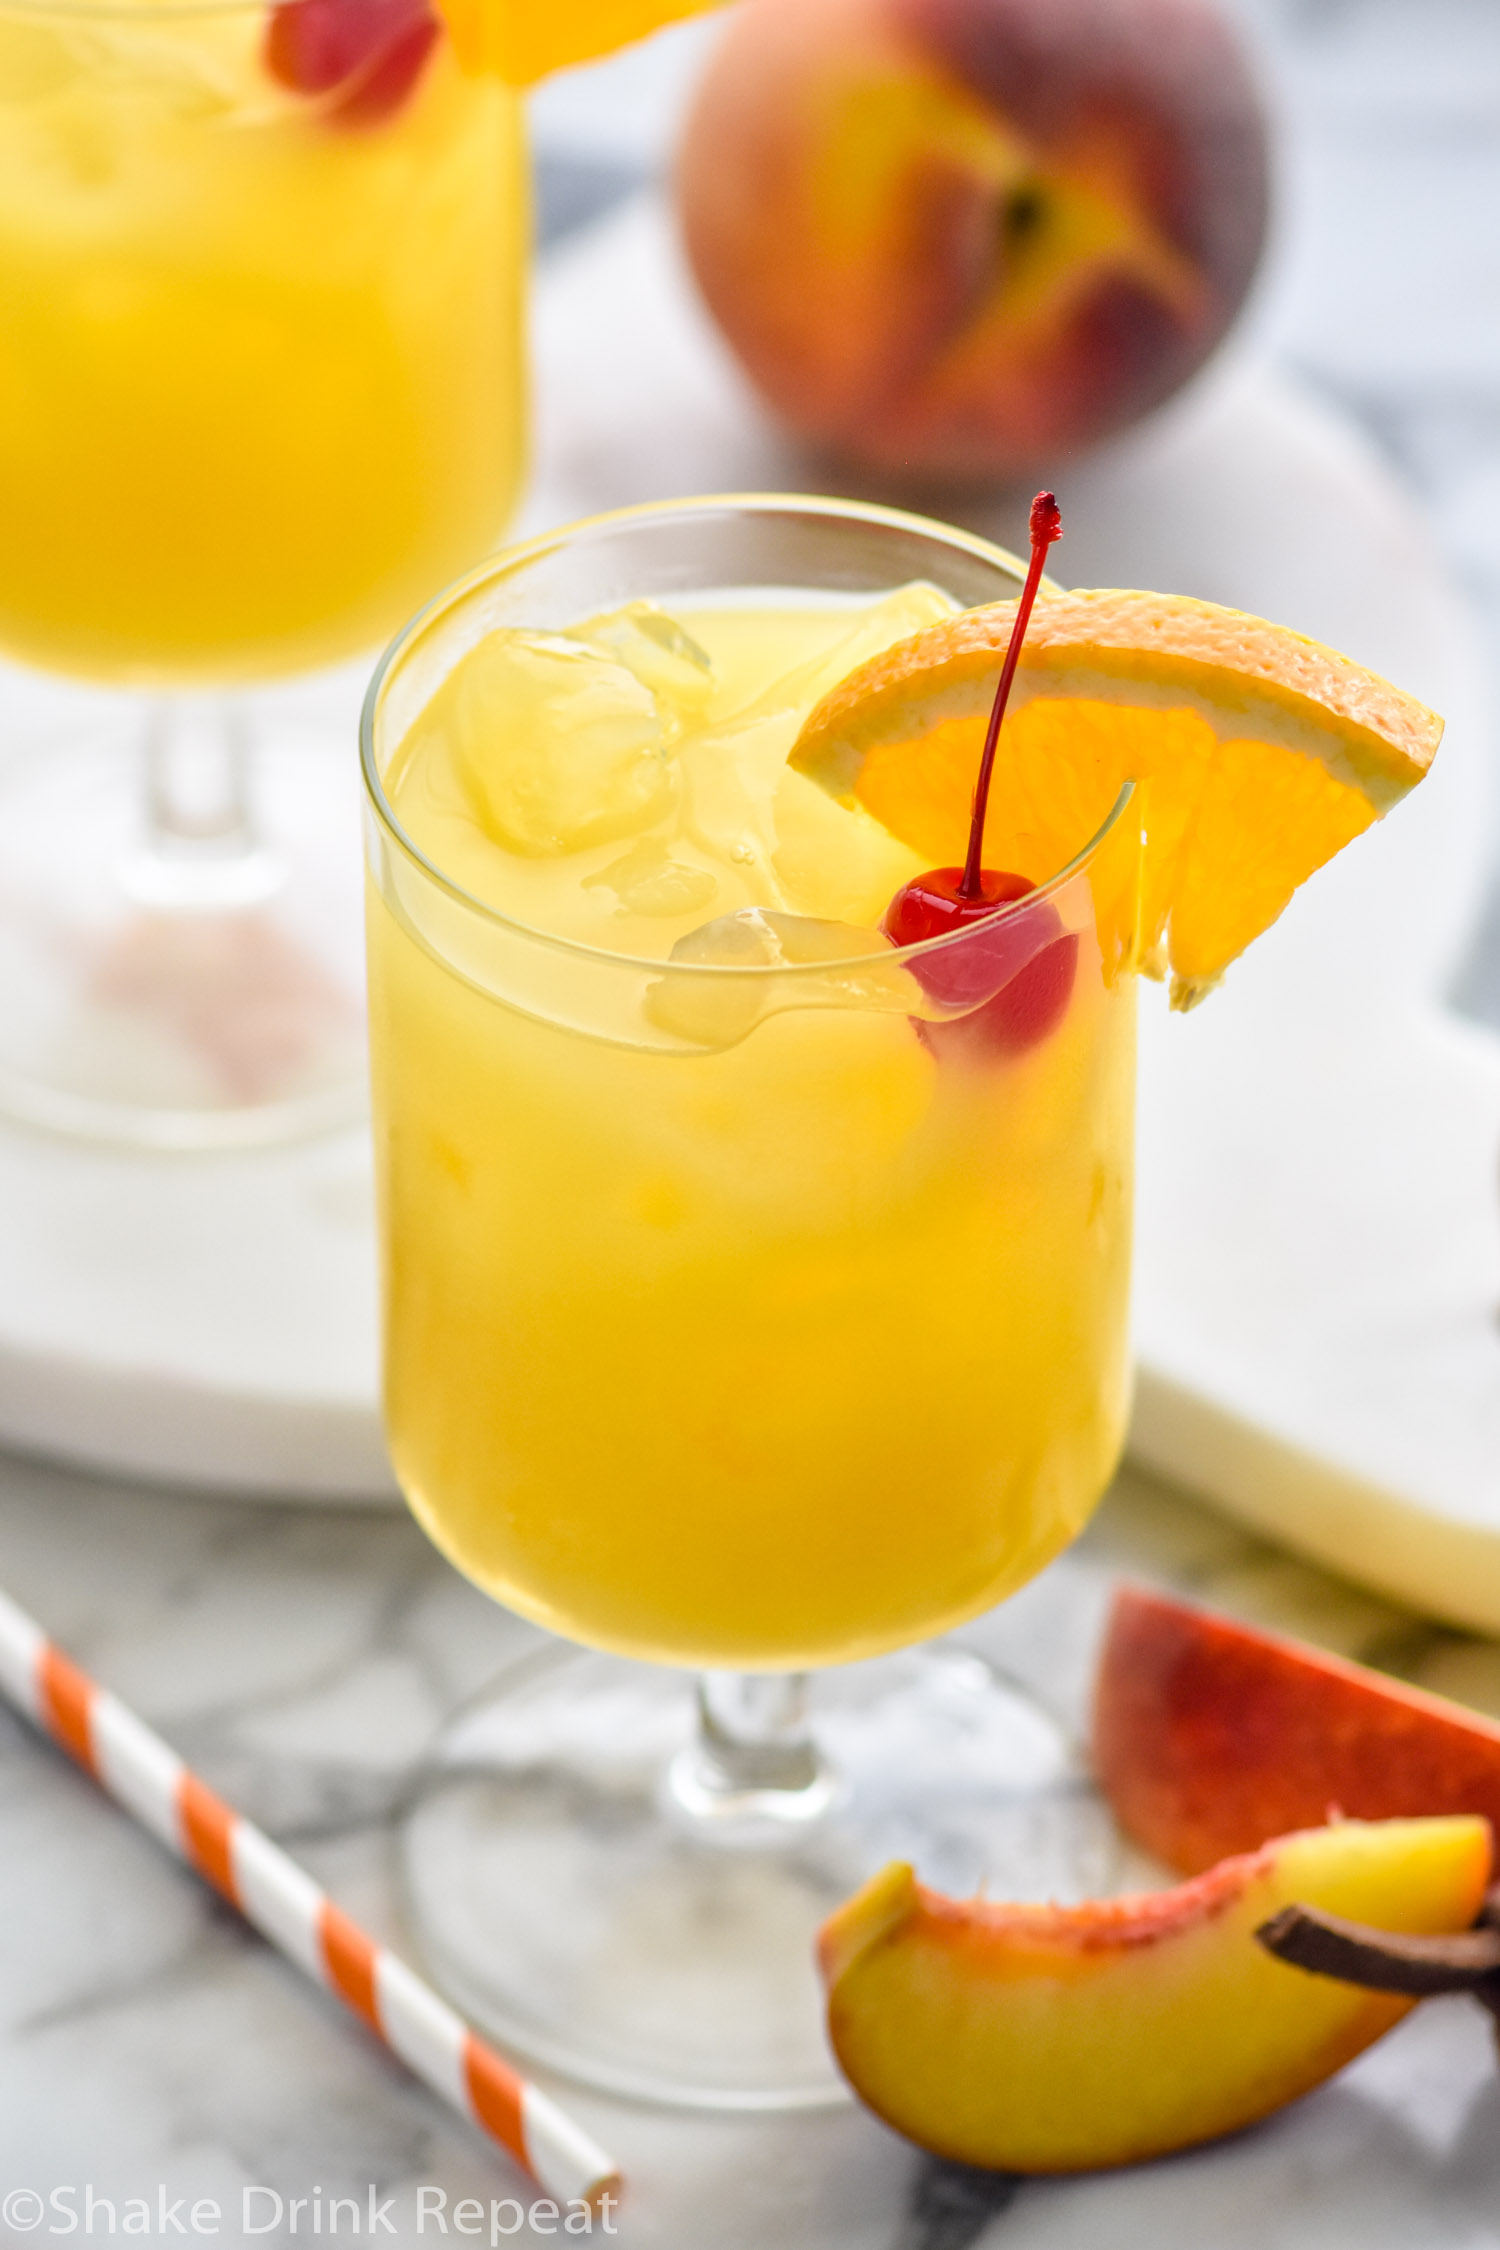 two glasses of Hairy Navel cocktail with ice and garnished with a cherry and slice of orange, surrounded by a straw and fresh peaches